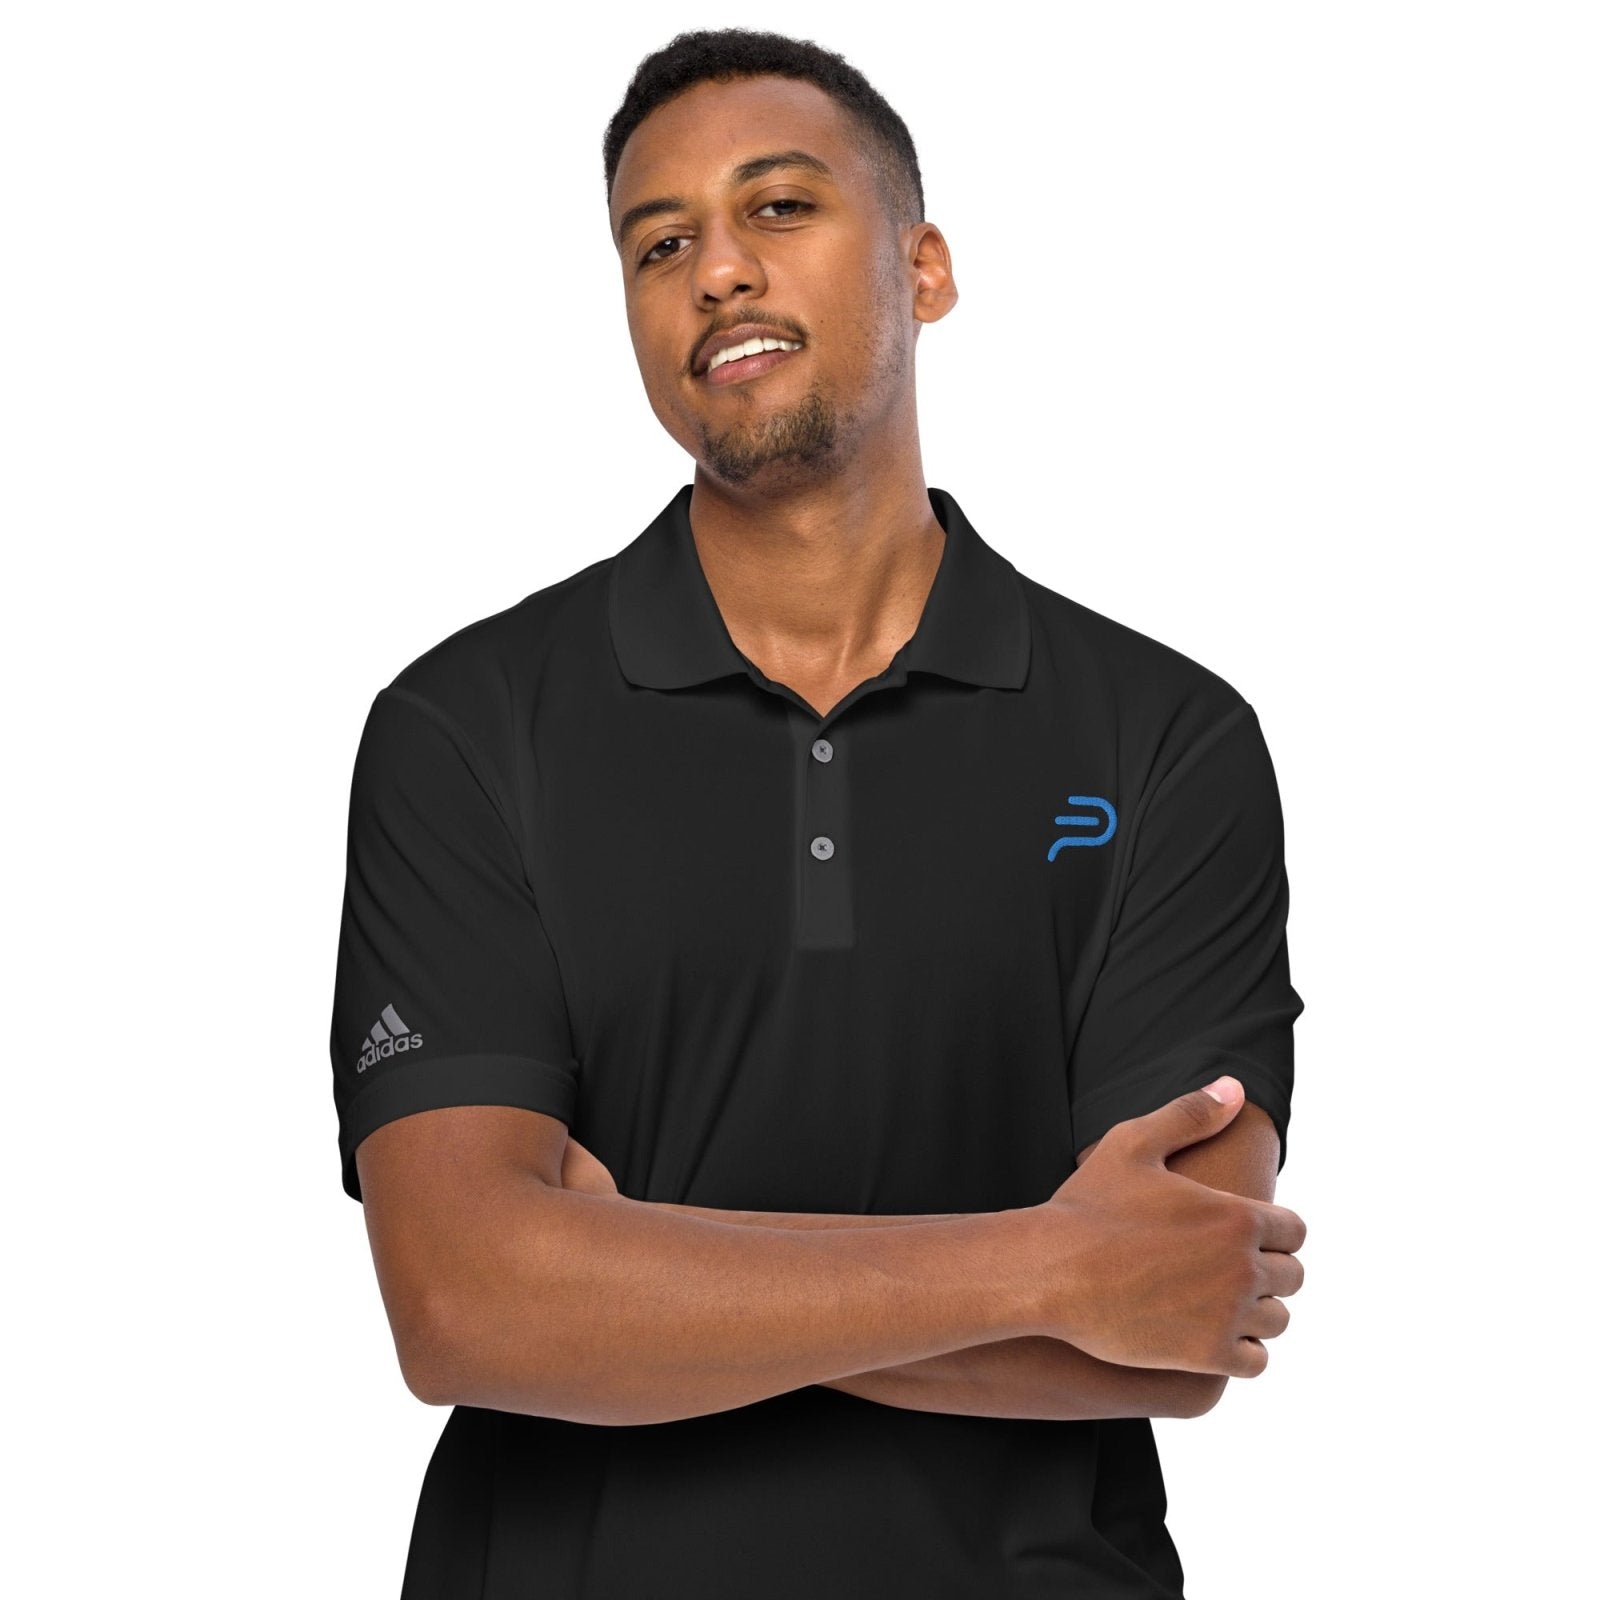 Adidas Embroidered Logo Performance Polo - Performance Backed